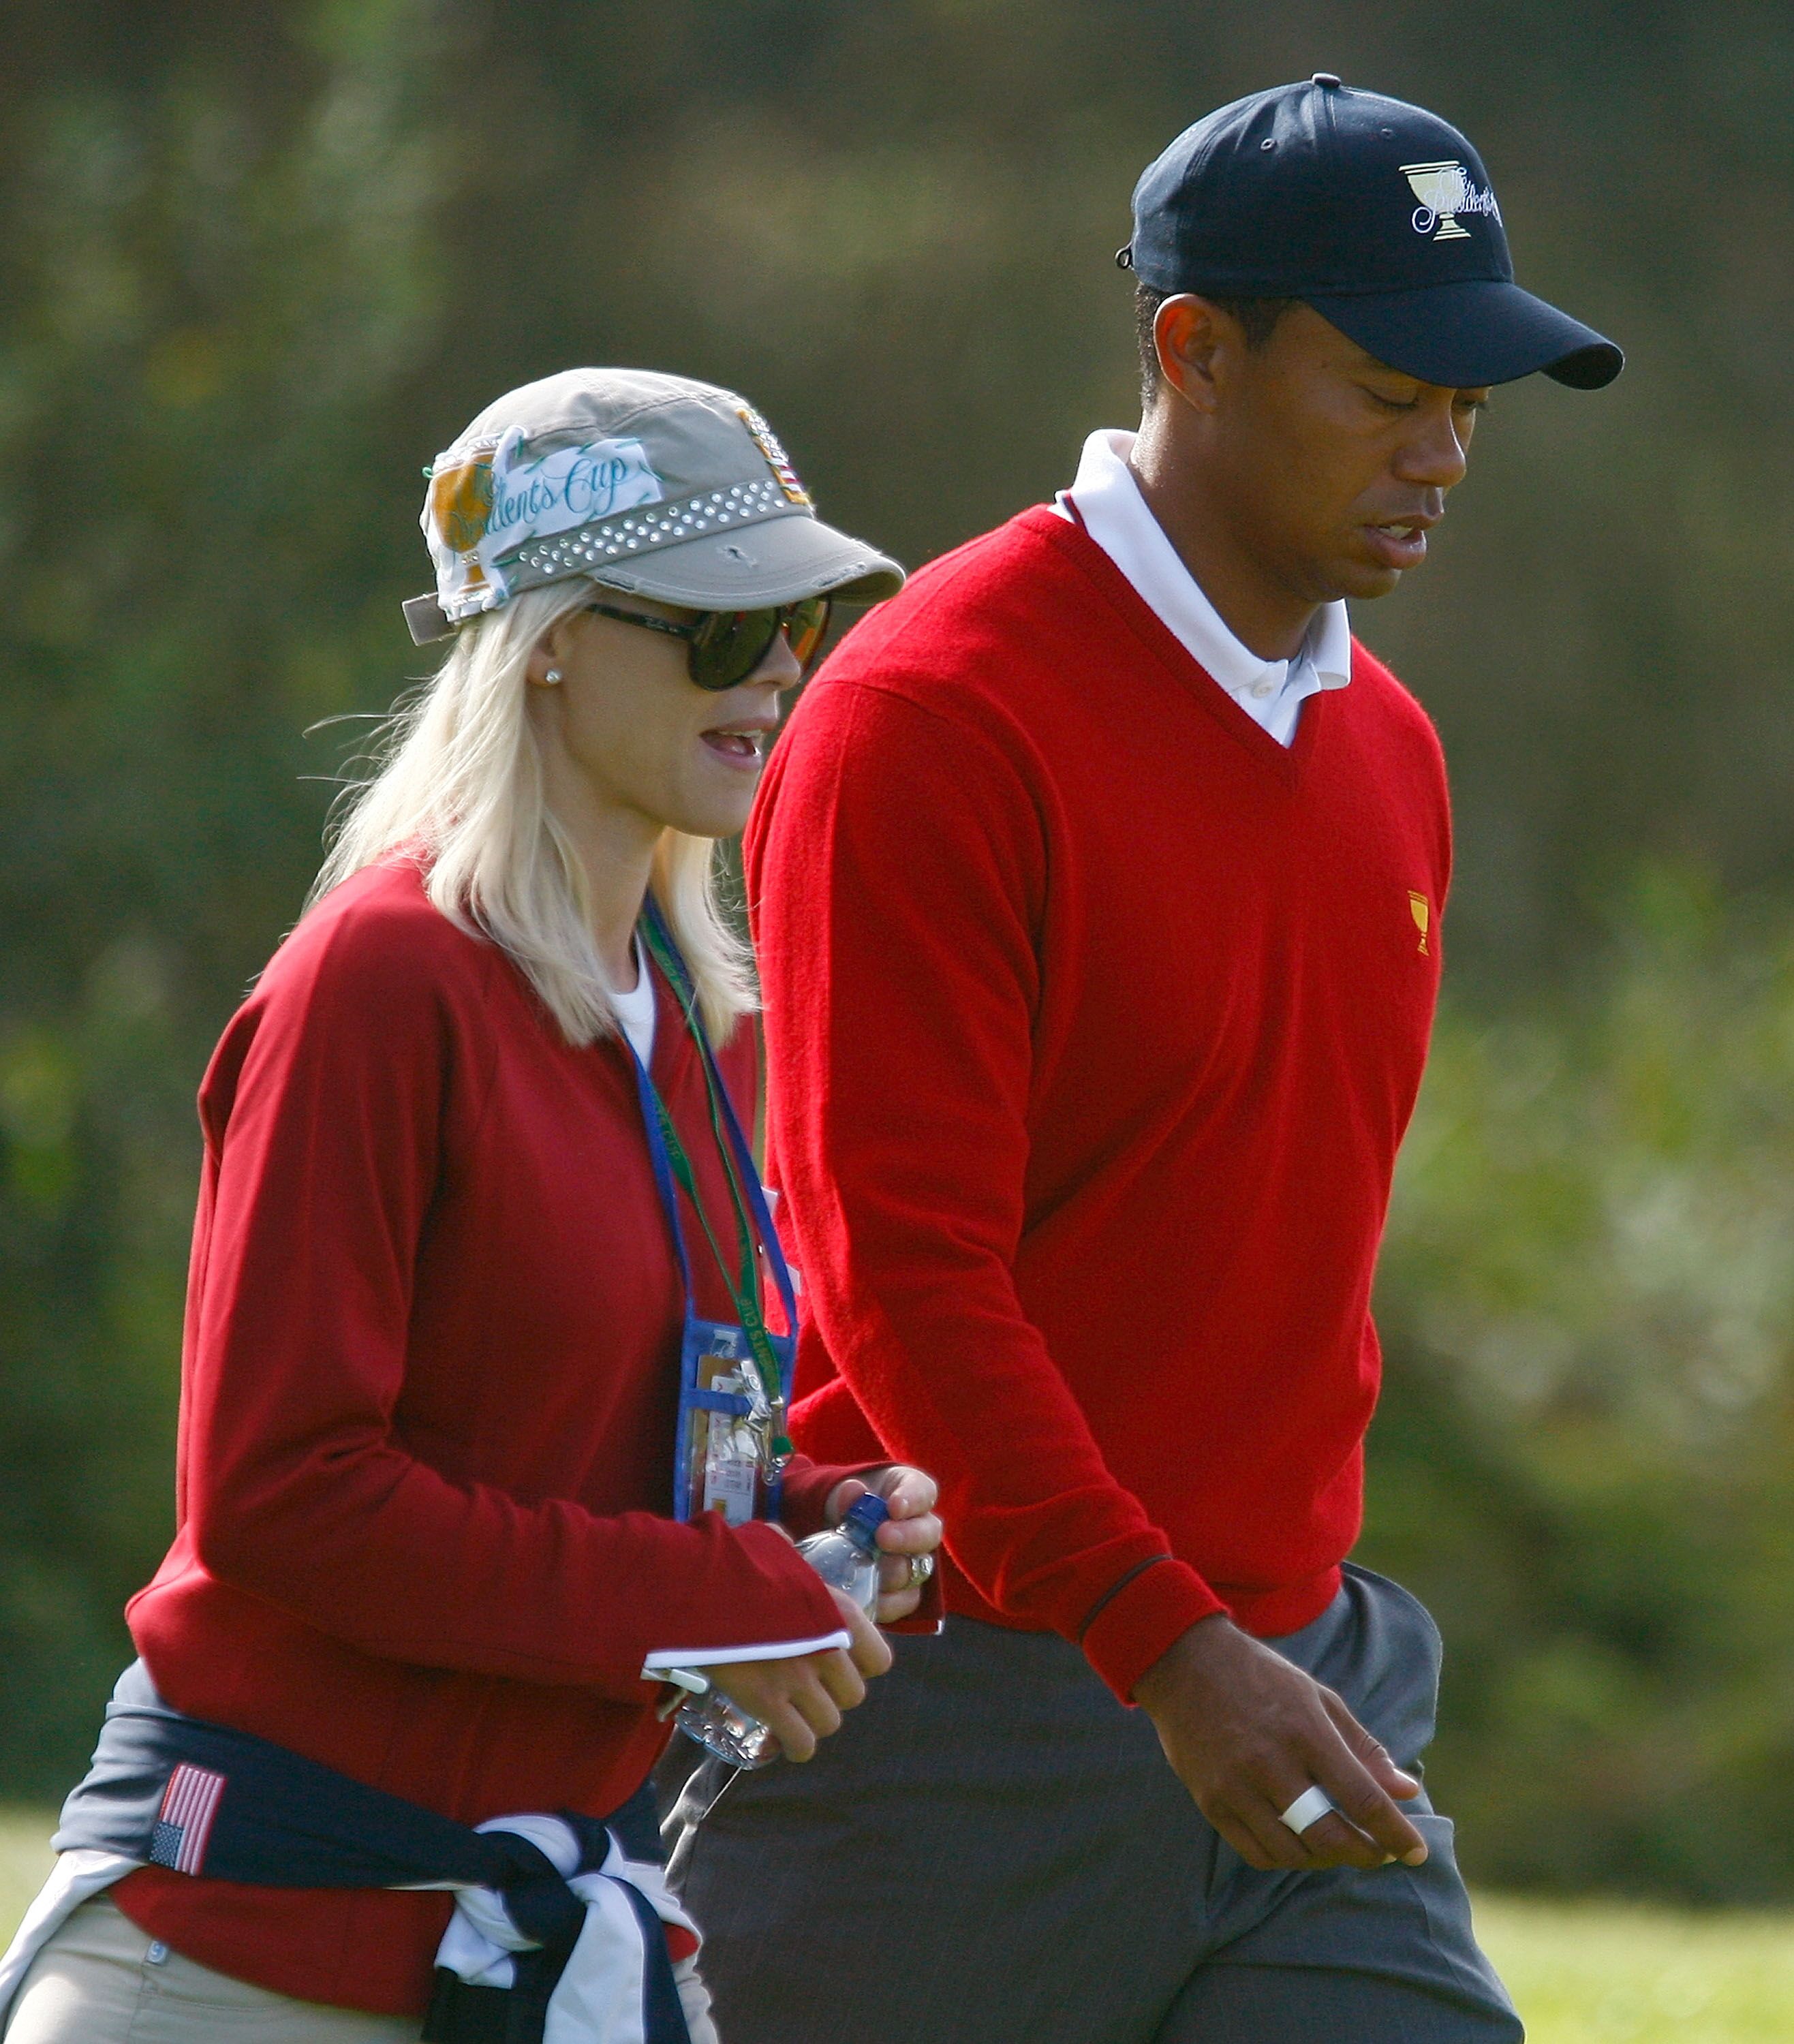 Tiger Woods of the USA Team walks with his wife Elin during the Day One Foursome Matches of The Presidents Cup. | Source: Getty Images